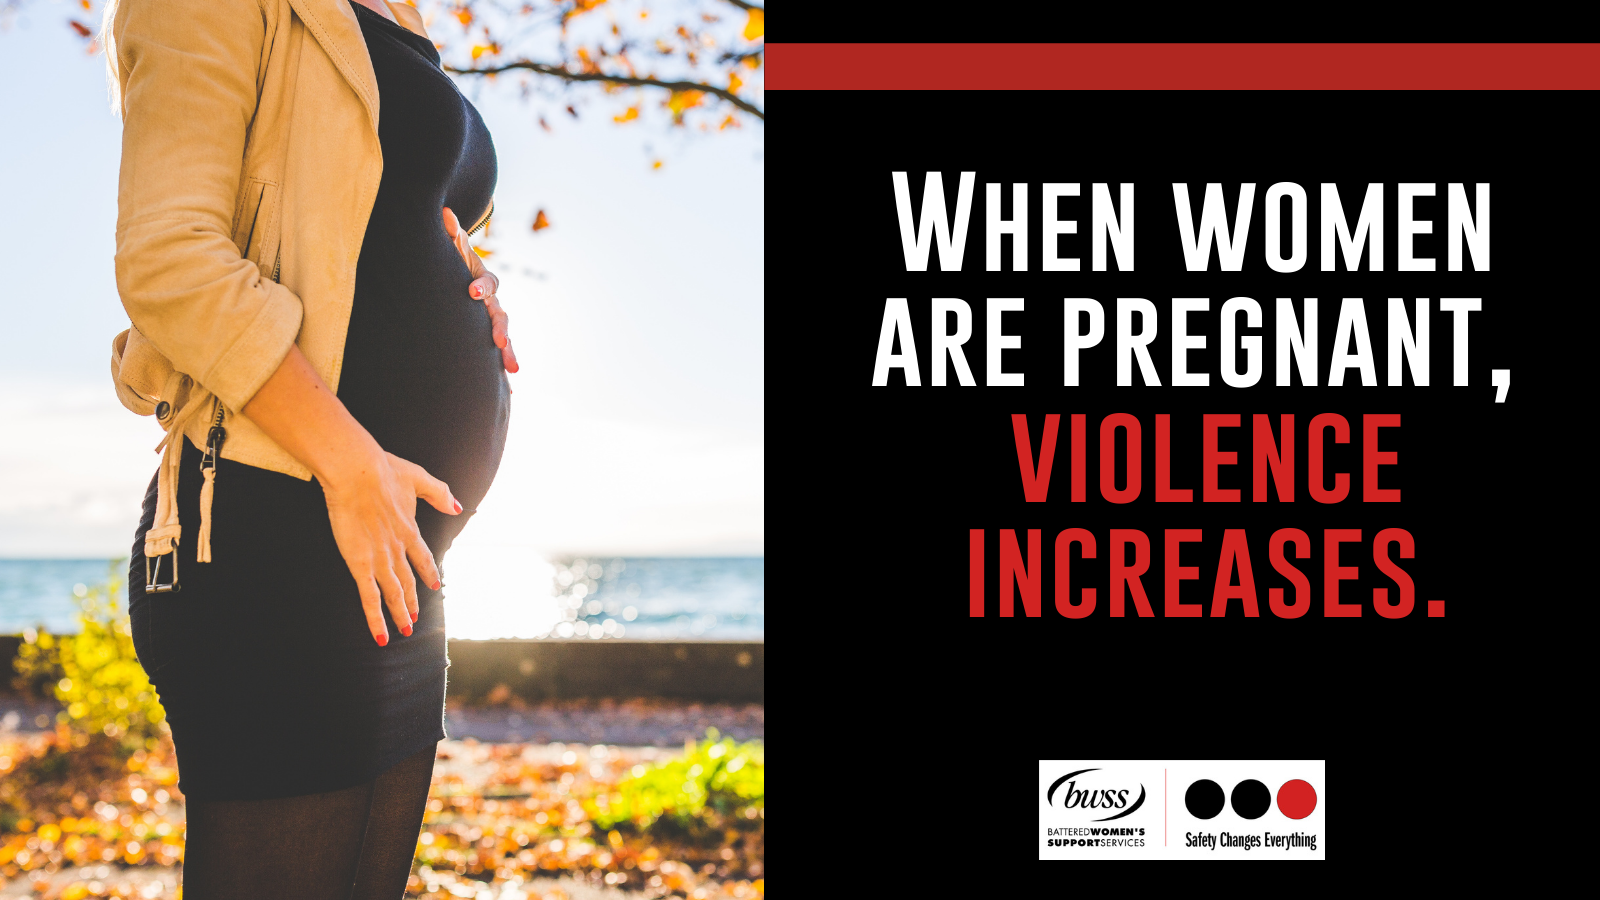 Women who experience violence and abuse are less likely to have access to reproductive justice.